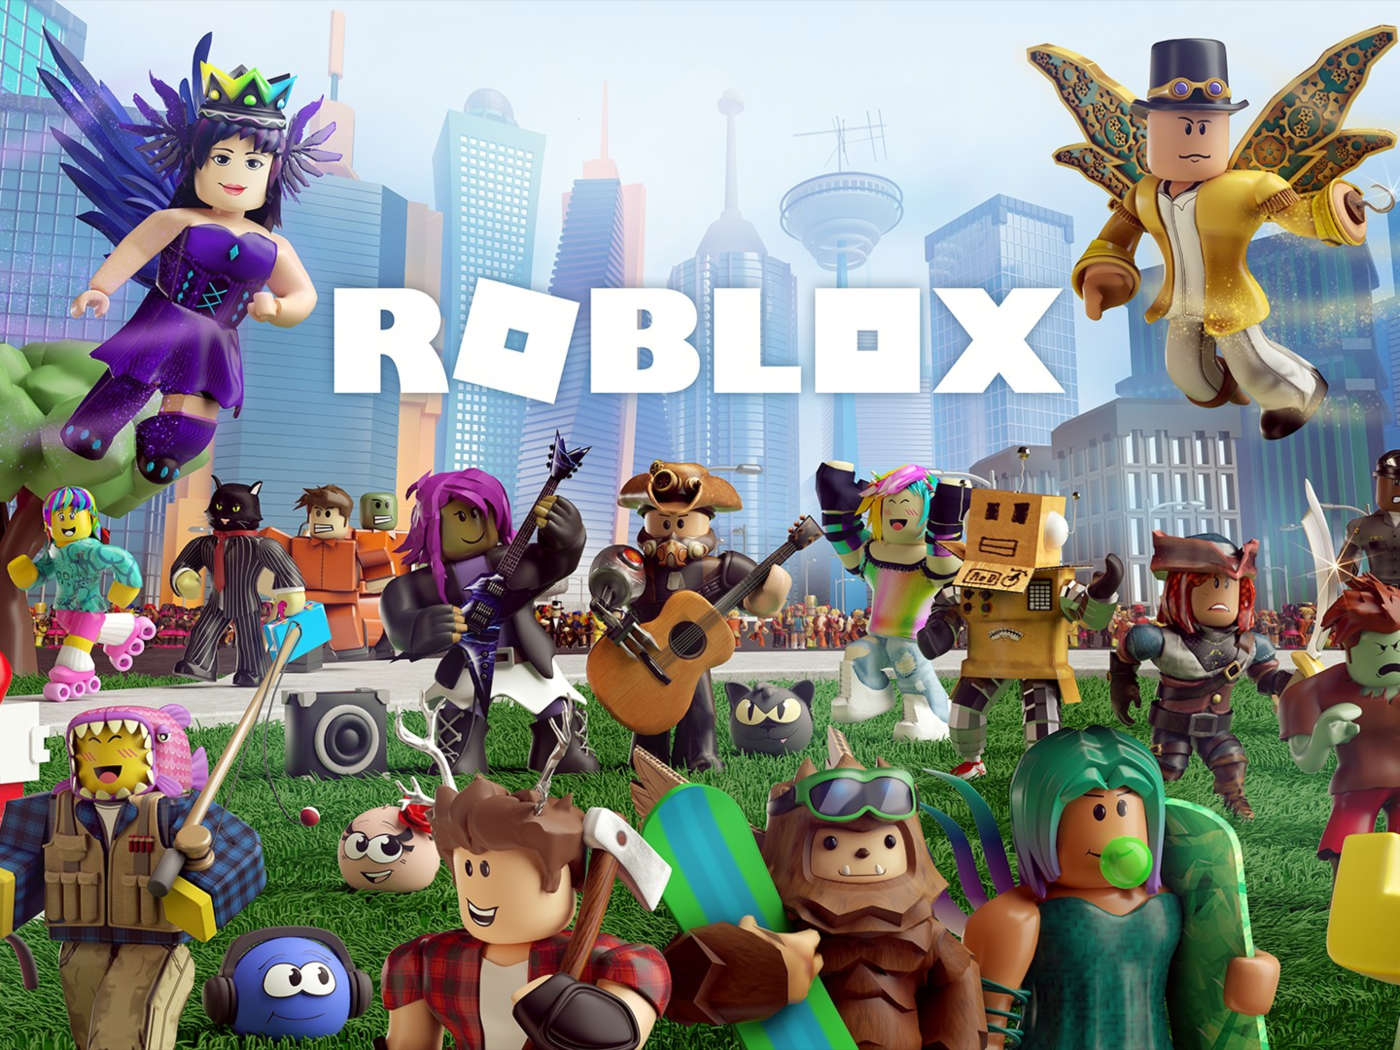 Roblox (Simplified Chinese, English, Korean, Japanese, Traditional